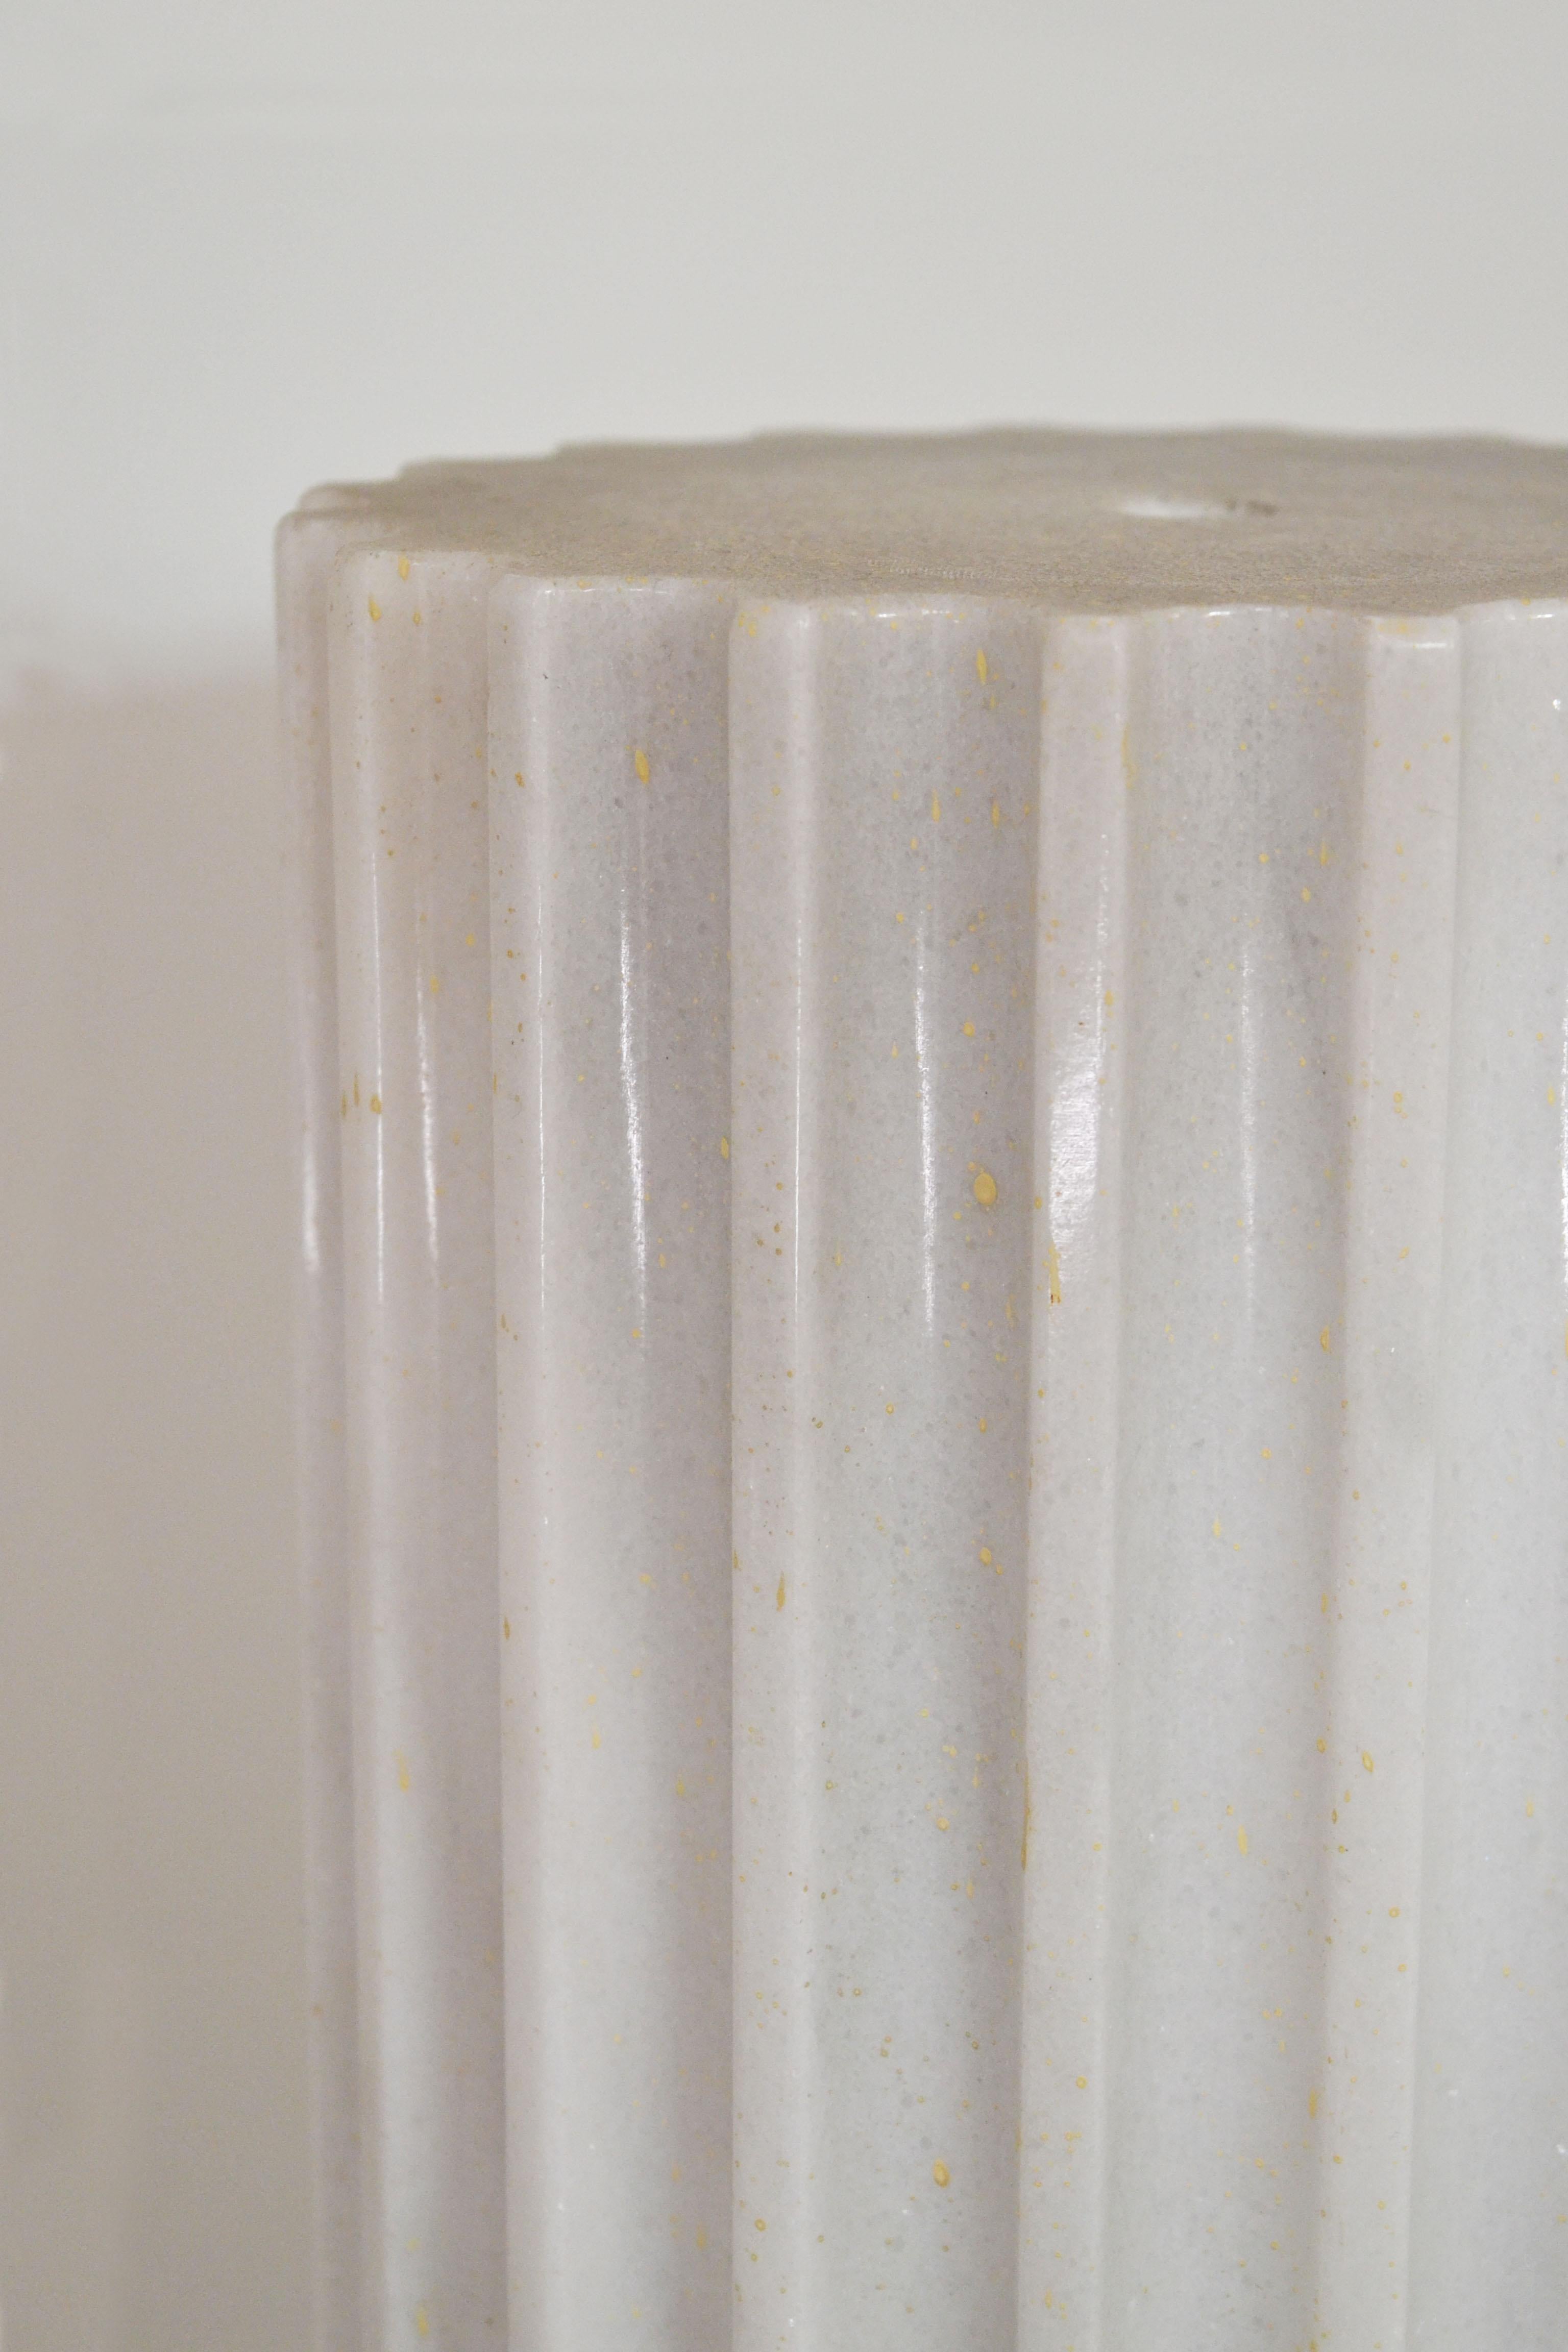 'ATHENA' Large Column / Pillar White Carrara Marble by Element & Co. In New Condition For Sale In Madrid, ES